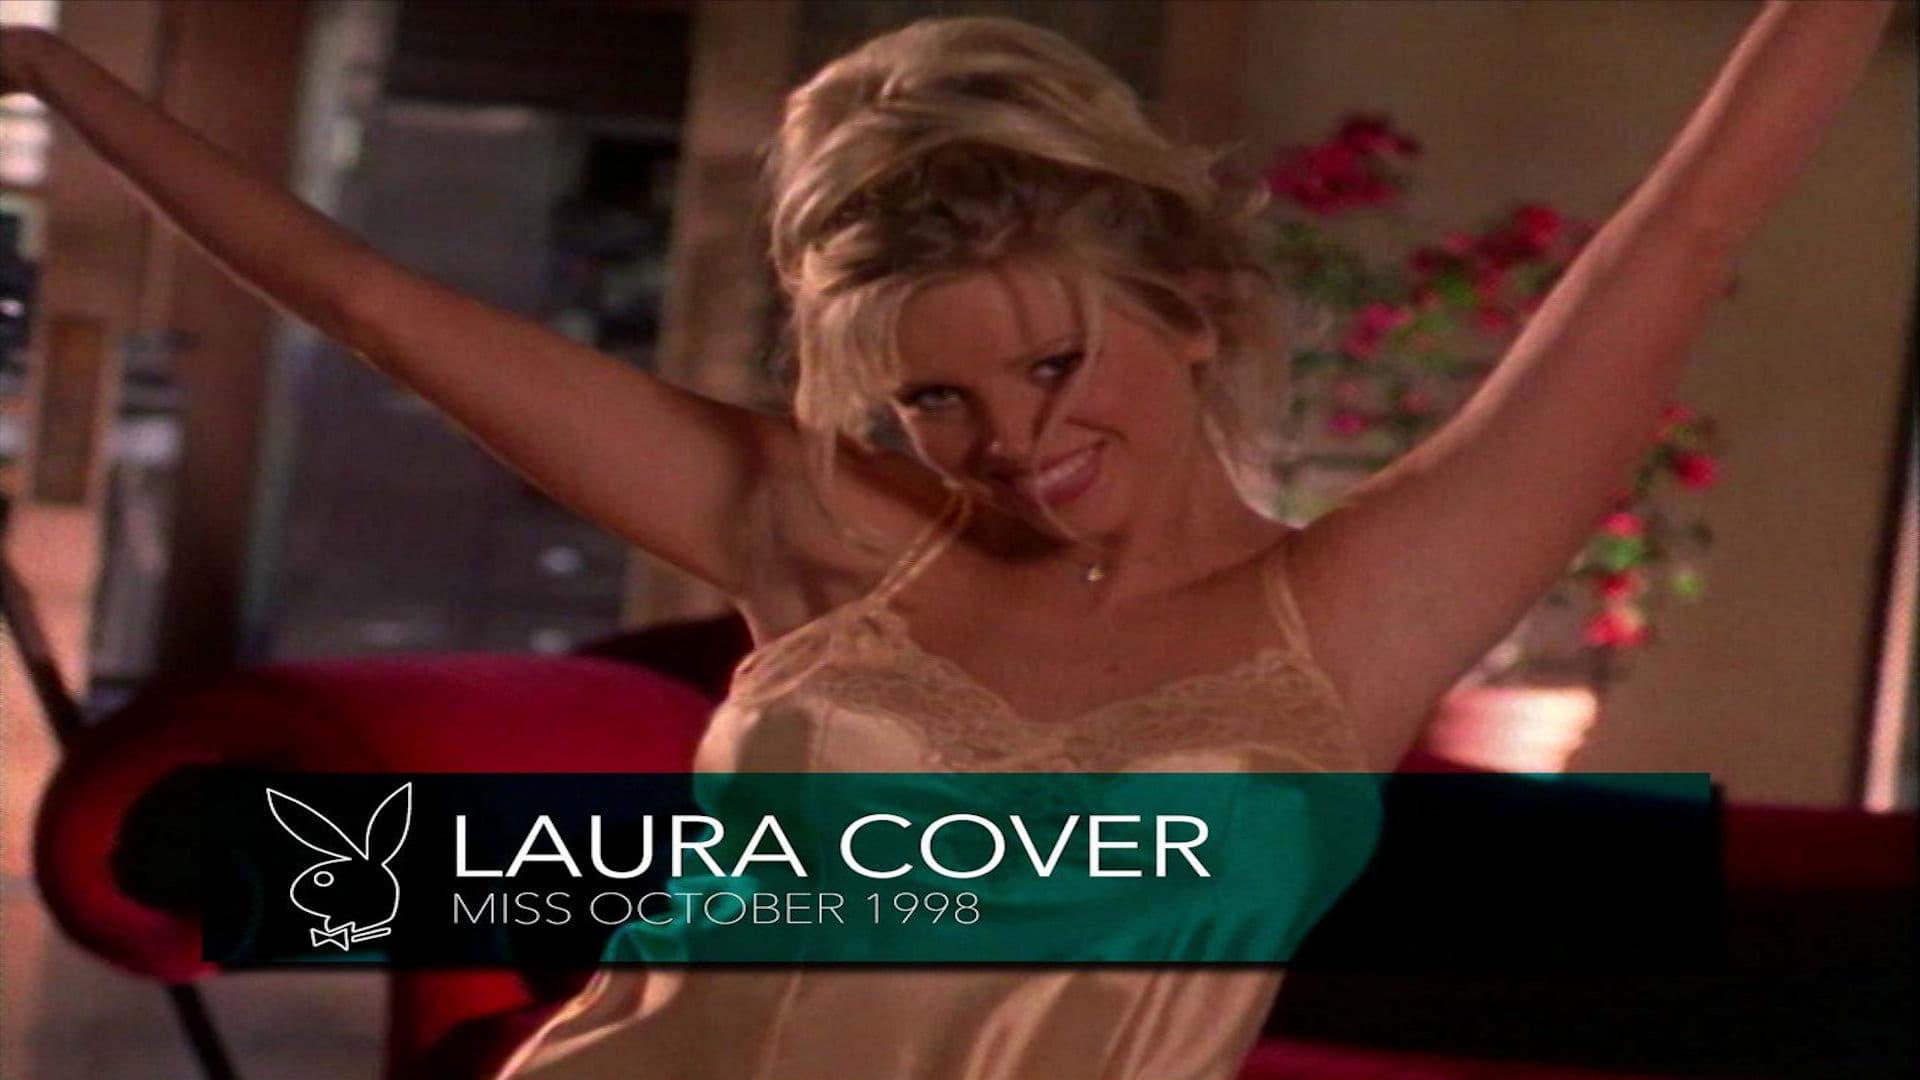 Laura Cover backdrop